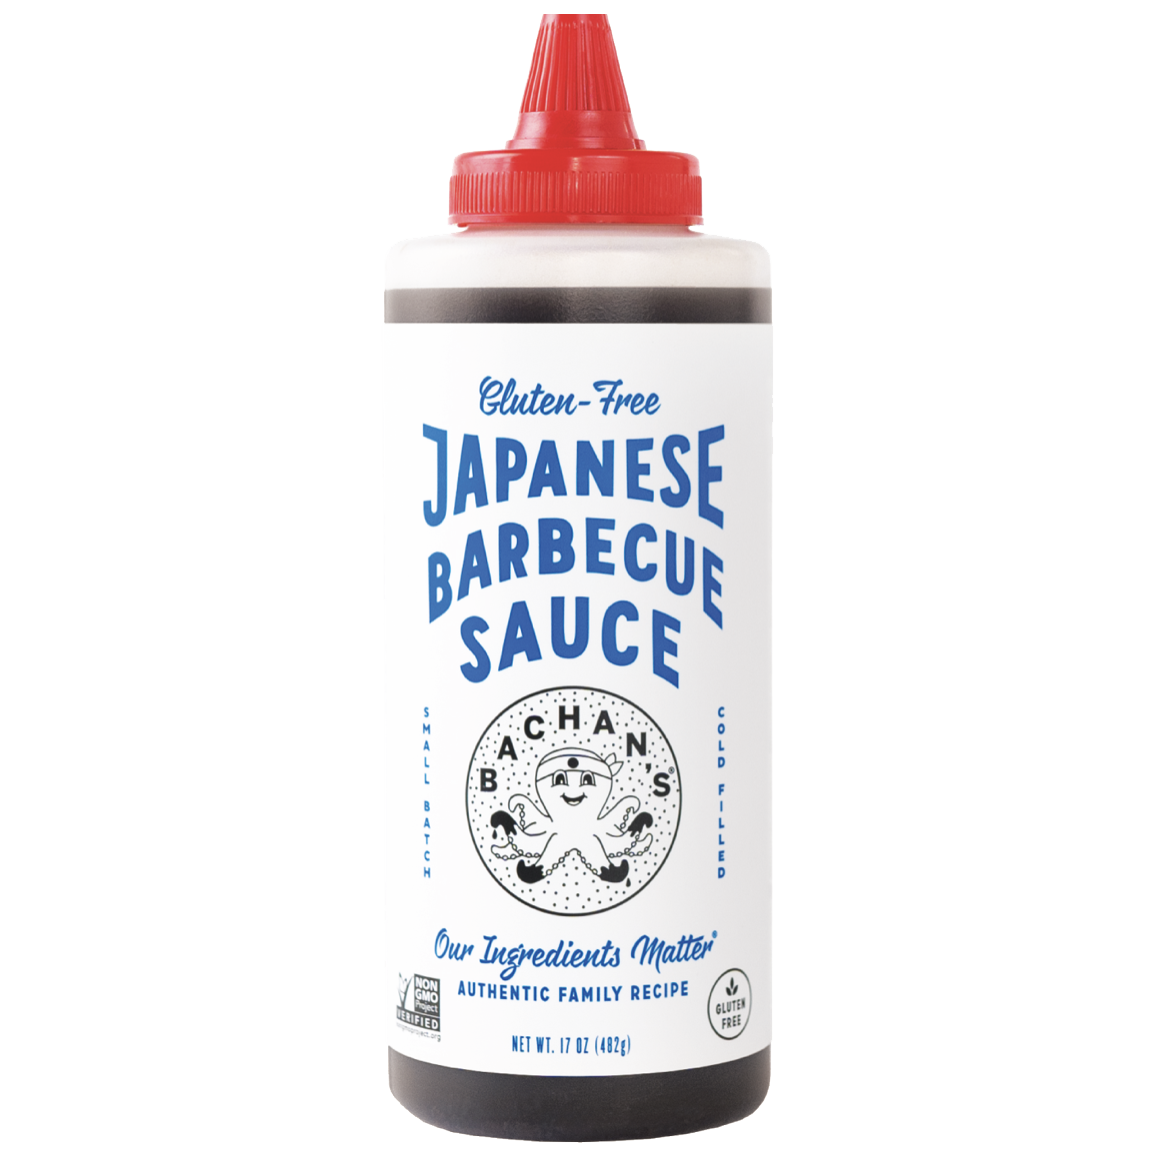 Gluten free Japanese Barbecue Sauce